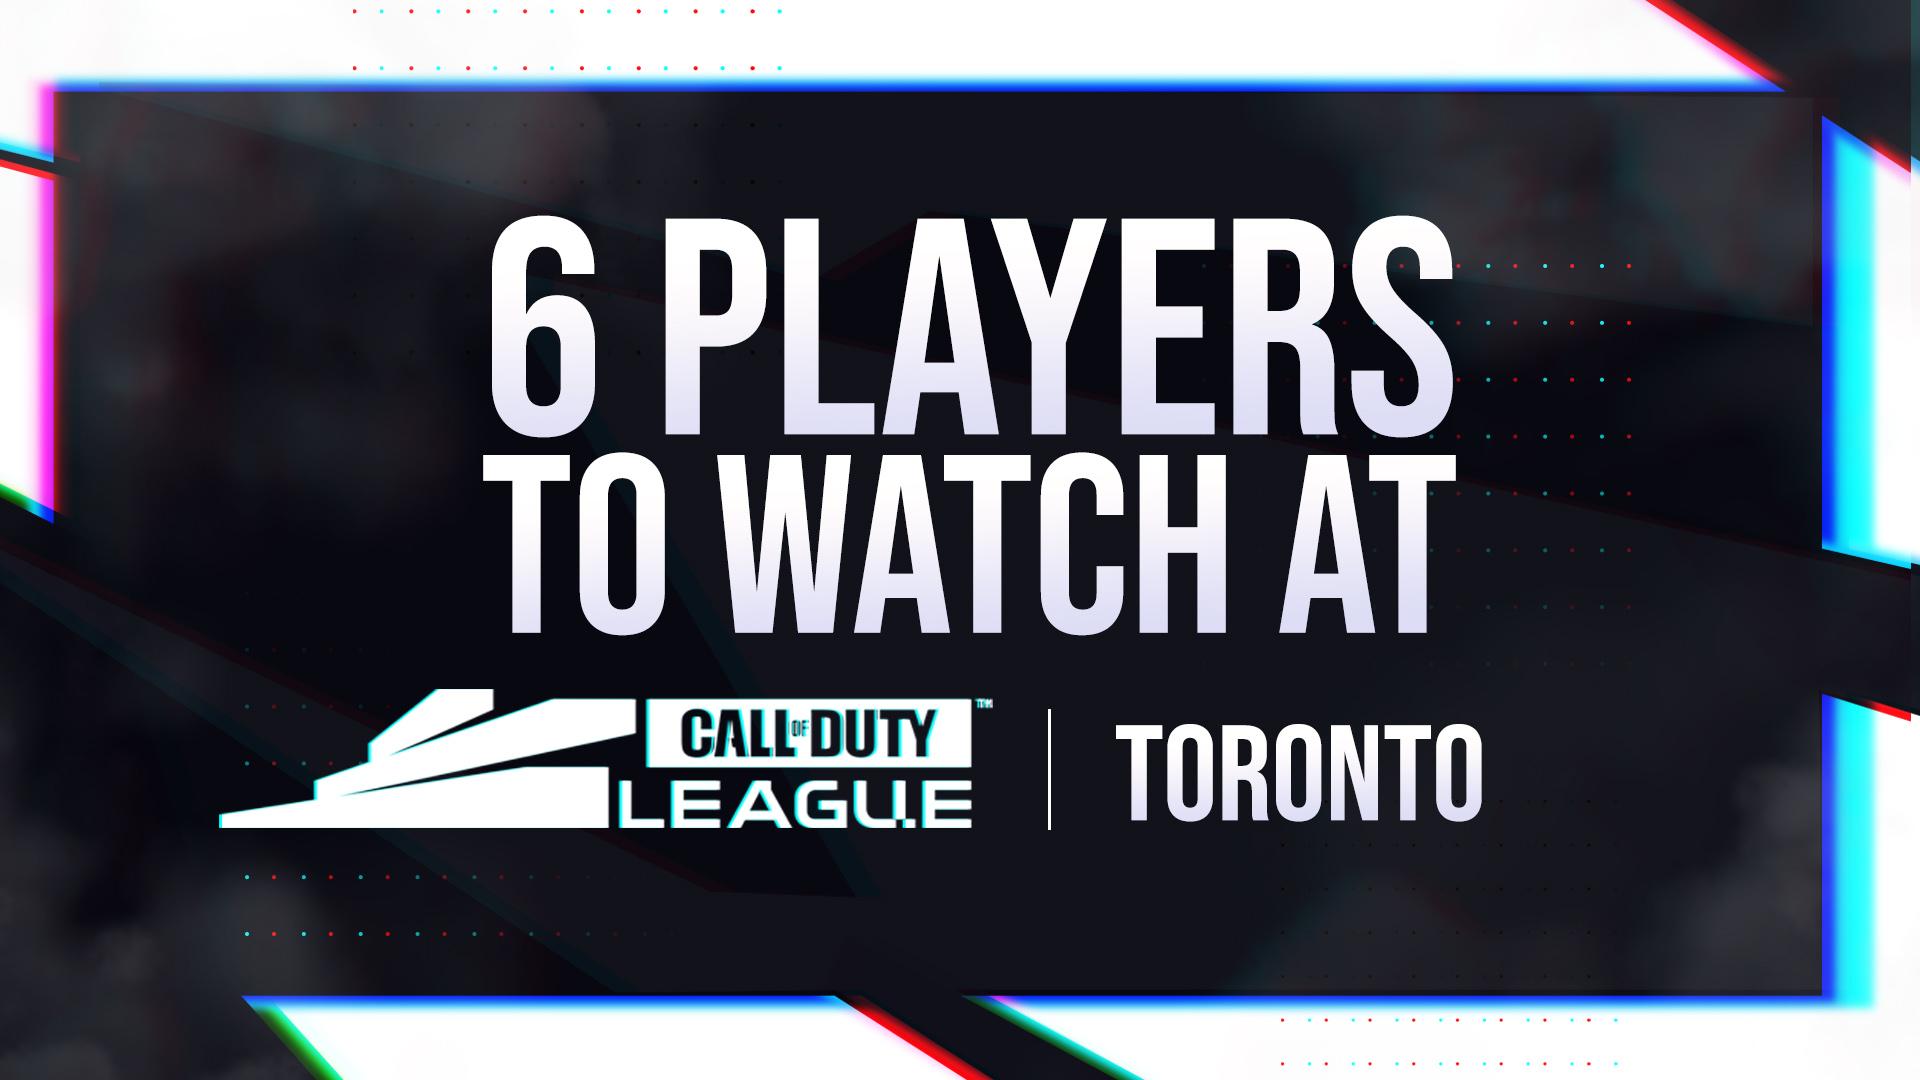 6 players to watch at CDL Toronto.